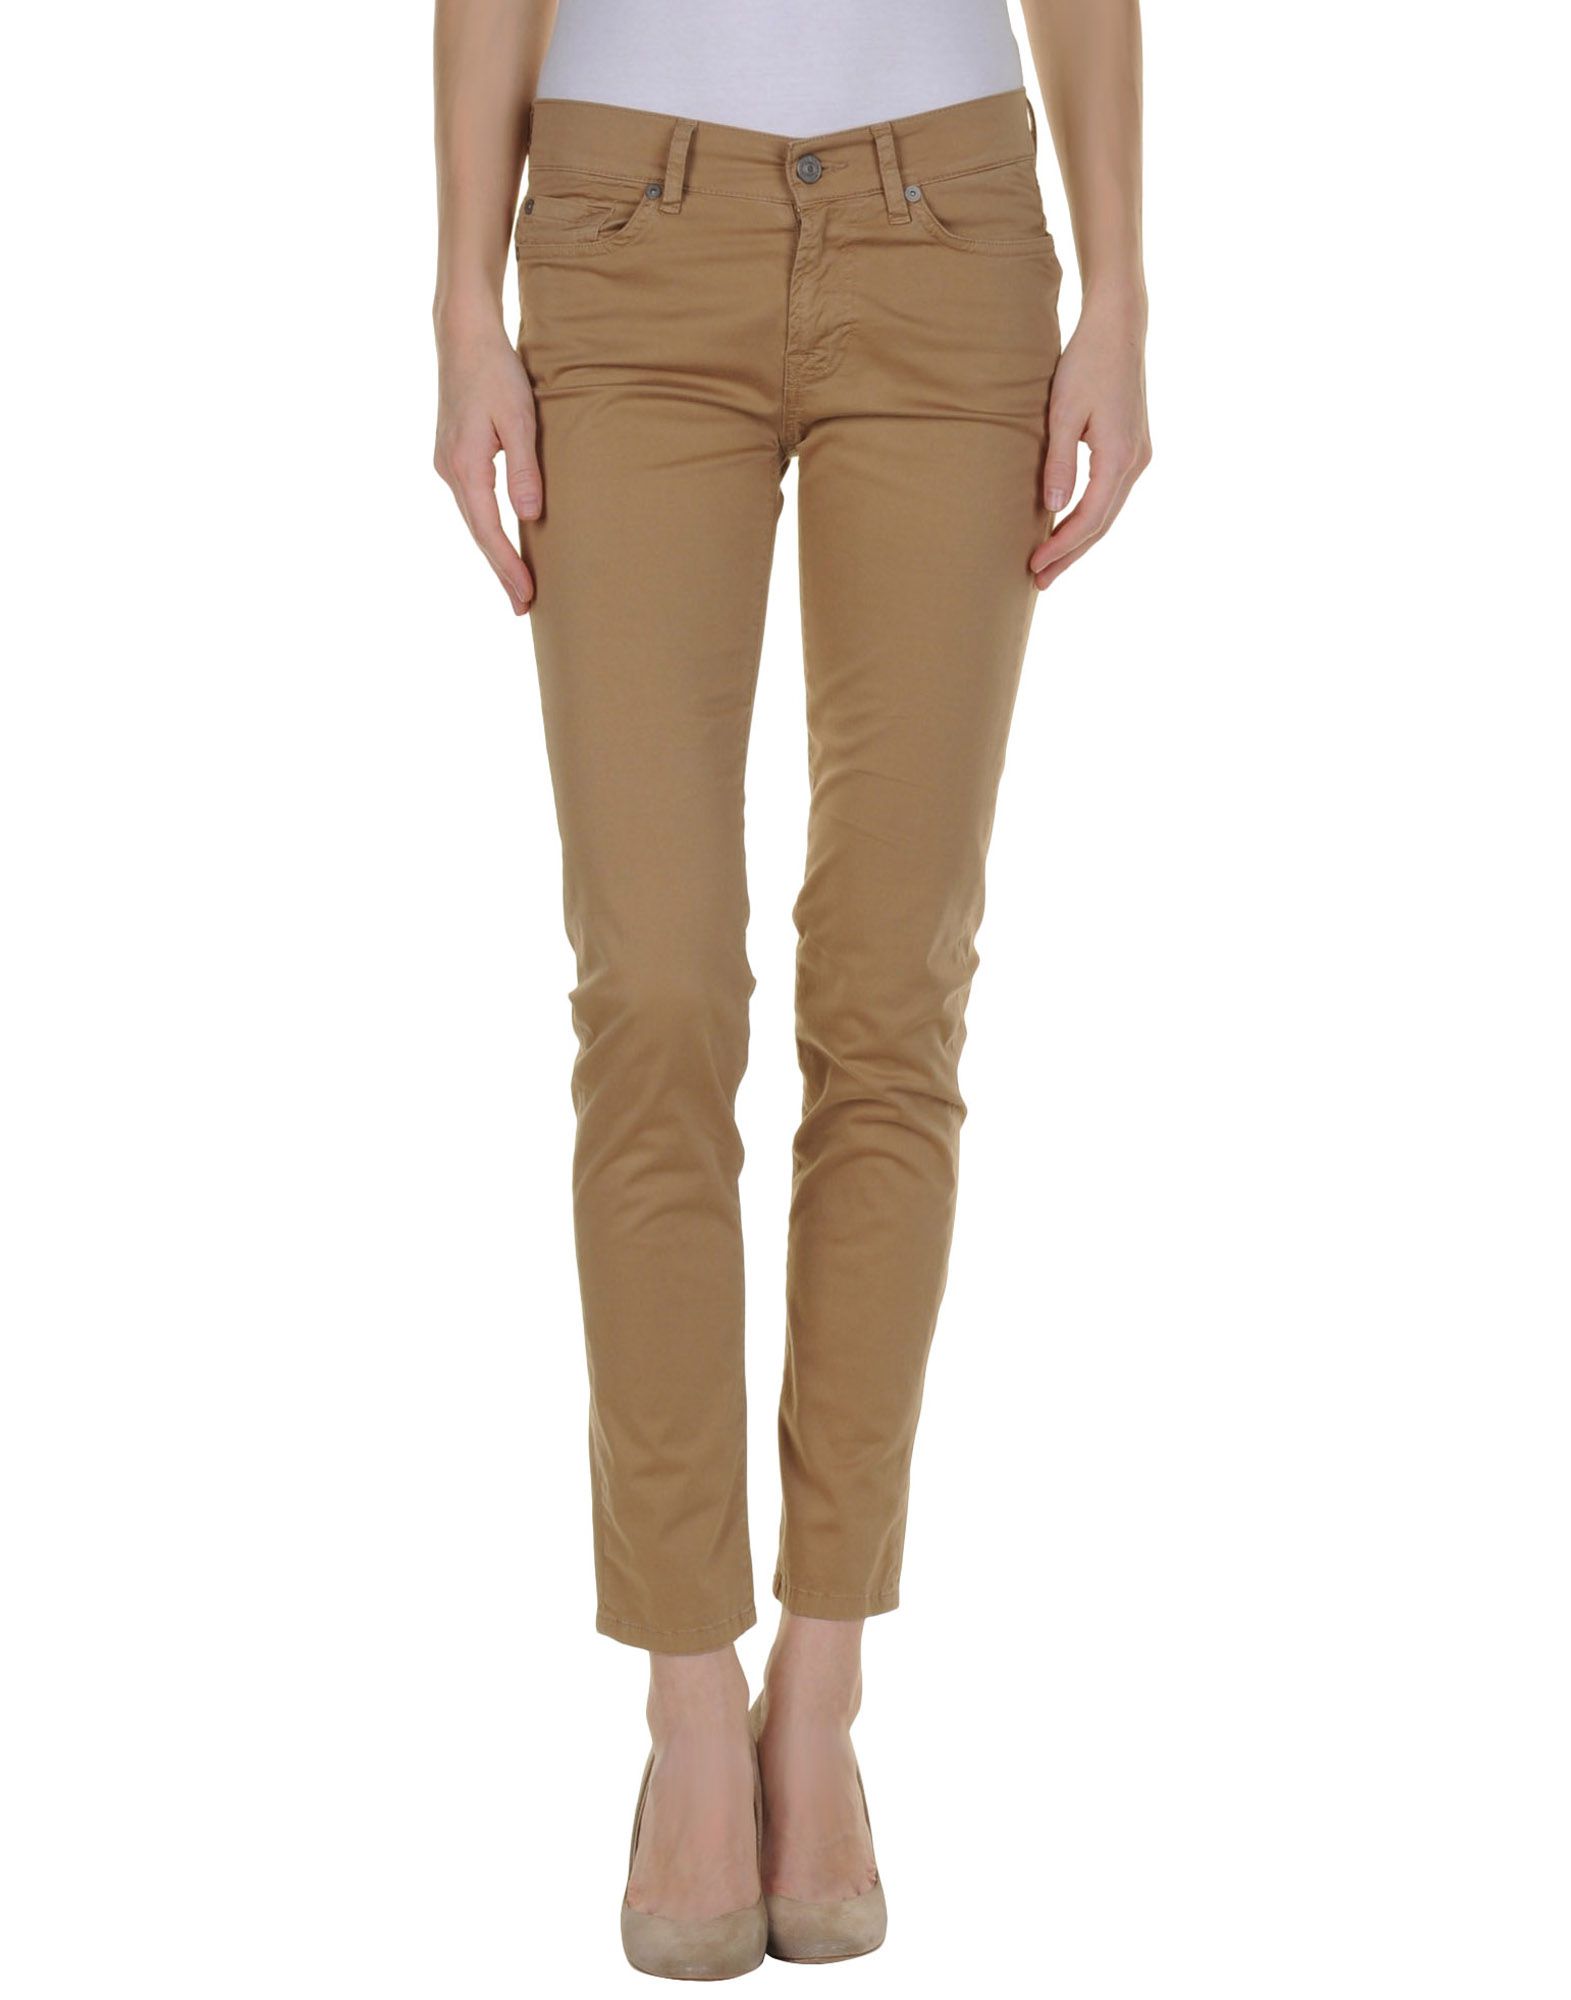 Foto 7 for all mankind pantalones
